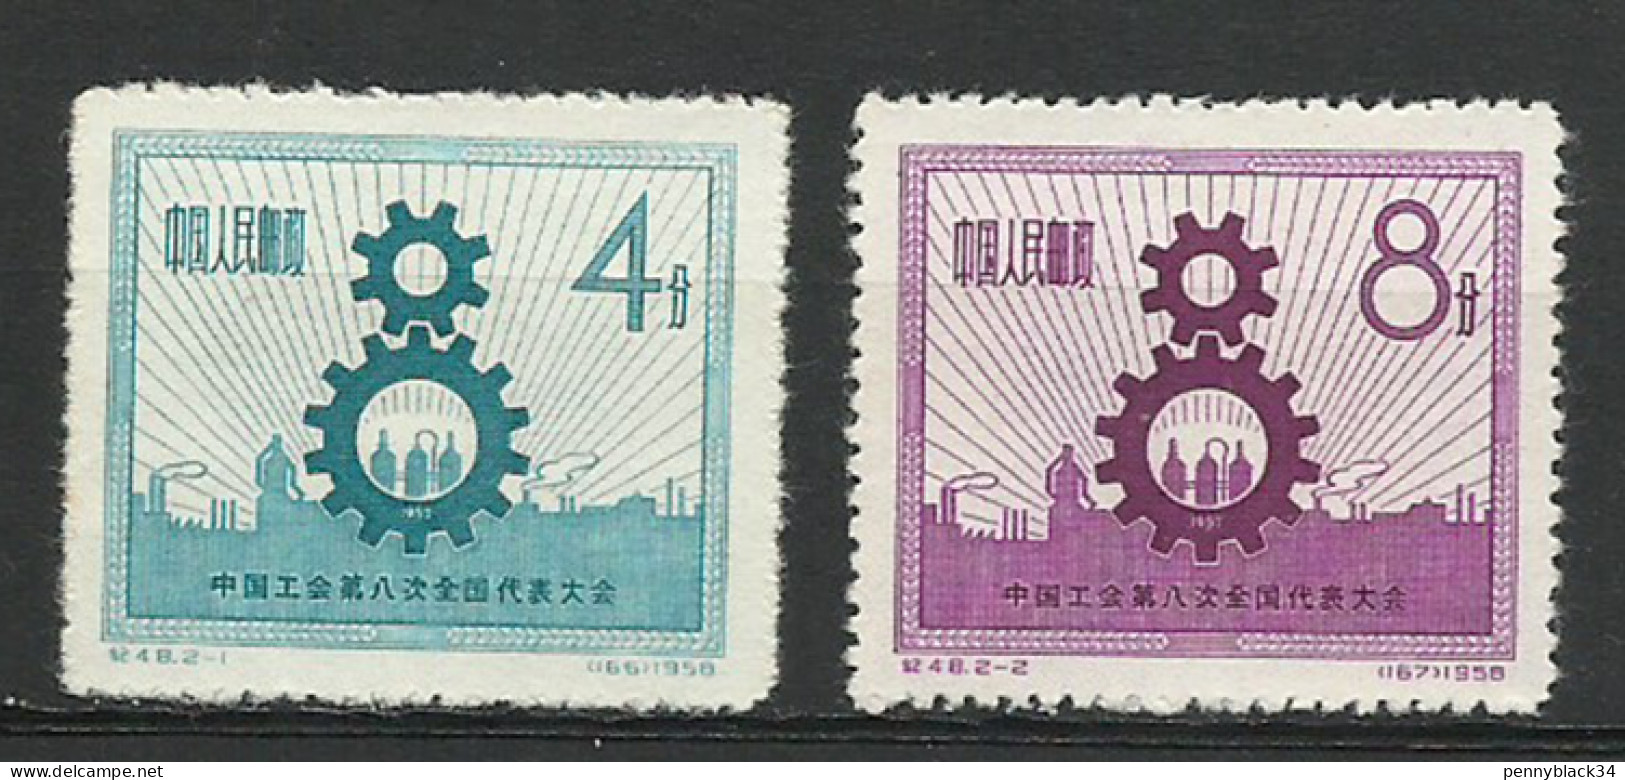 Chine China 1958 Yvert 1133/1134 ** Congrès Des Syndicats - 8th National Congress Of Chinese Trade Union Ref C48 - Unused Stamps